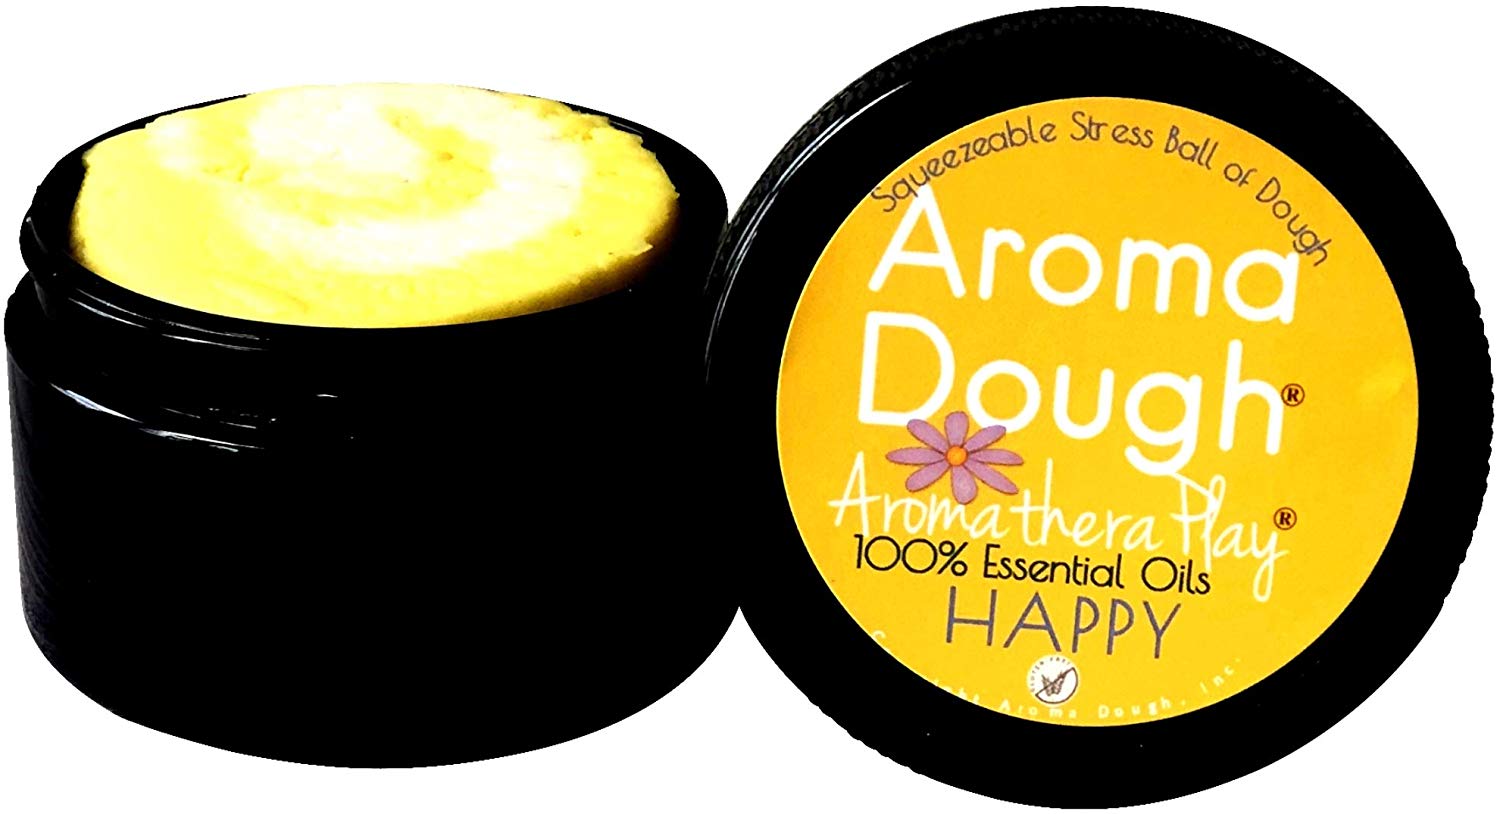 Play Therapy Tools Aroma Dough Sleepytime Lavender Aromatherapy Play Dough Gluten-Free Non-Allergenic Natural Playdough Helps Promote Sleep Sensory Room Equipment